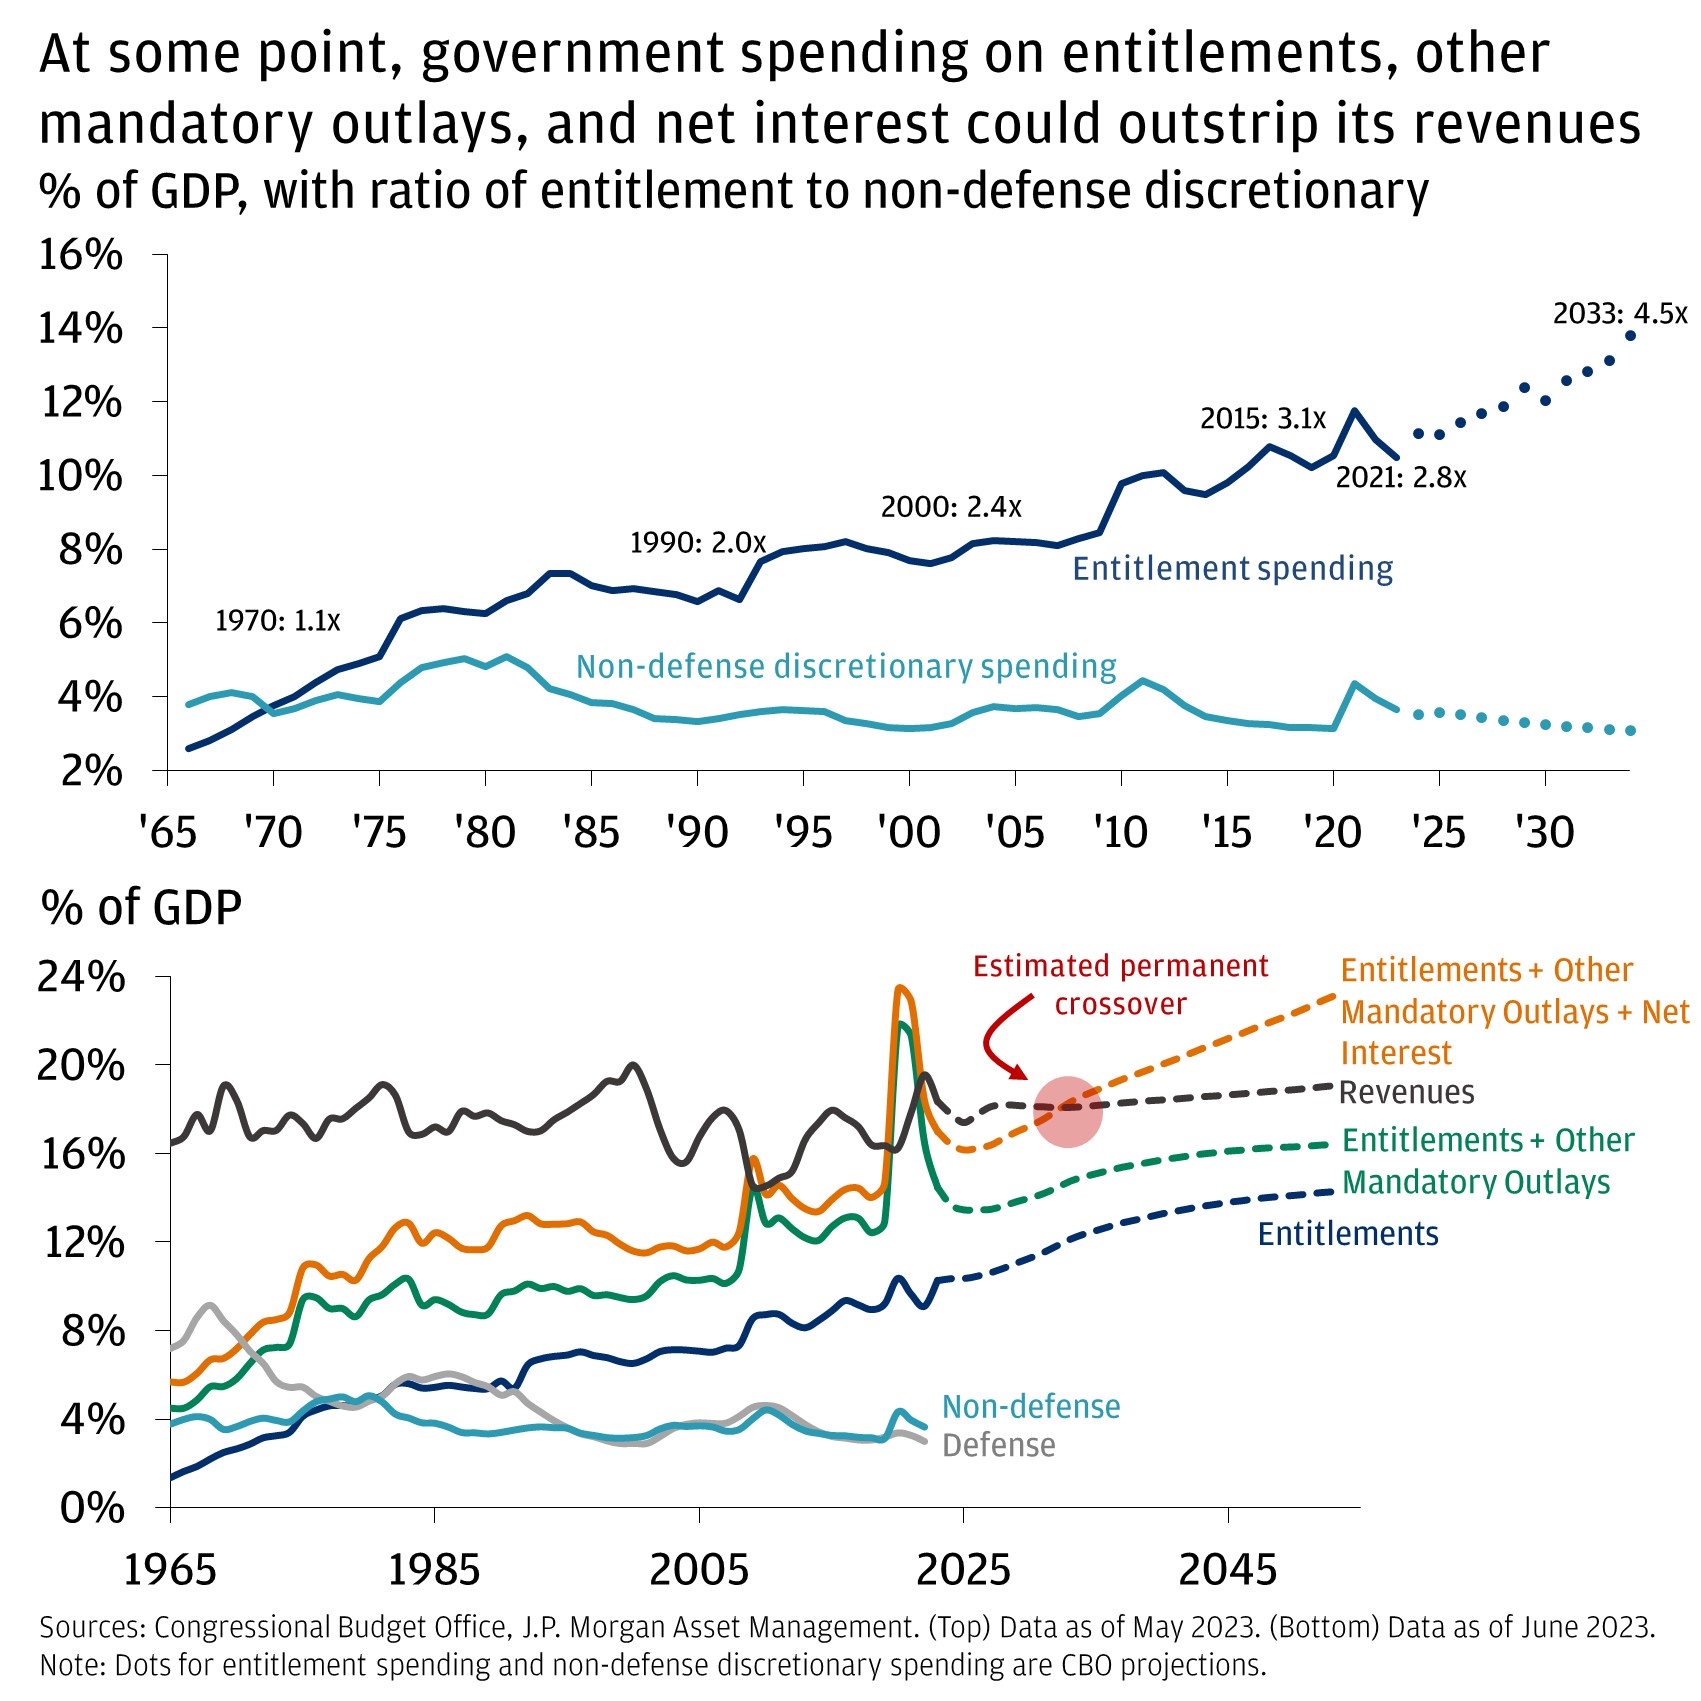 At some point, government spending on entitlements, other mandatory outlays, and net interest could outstrip its revenues